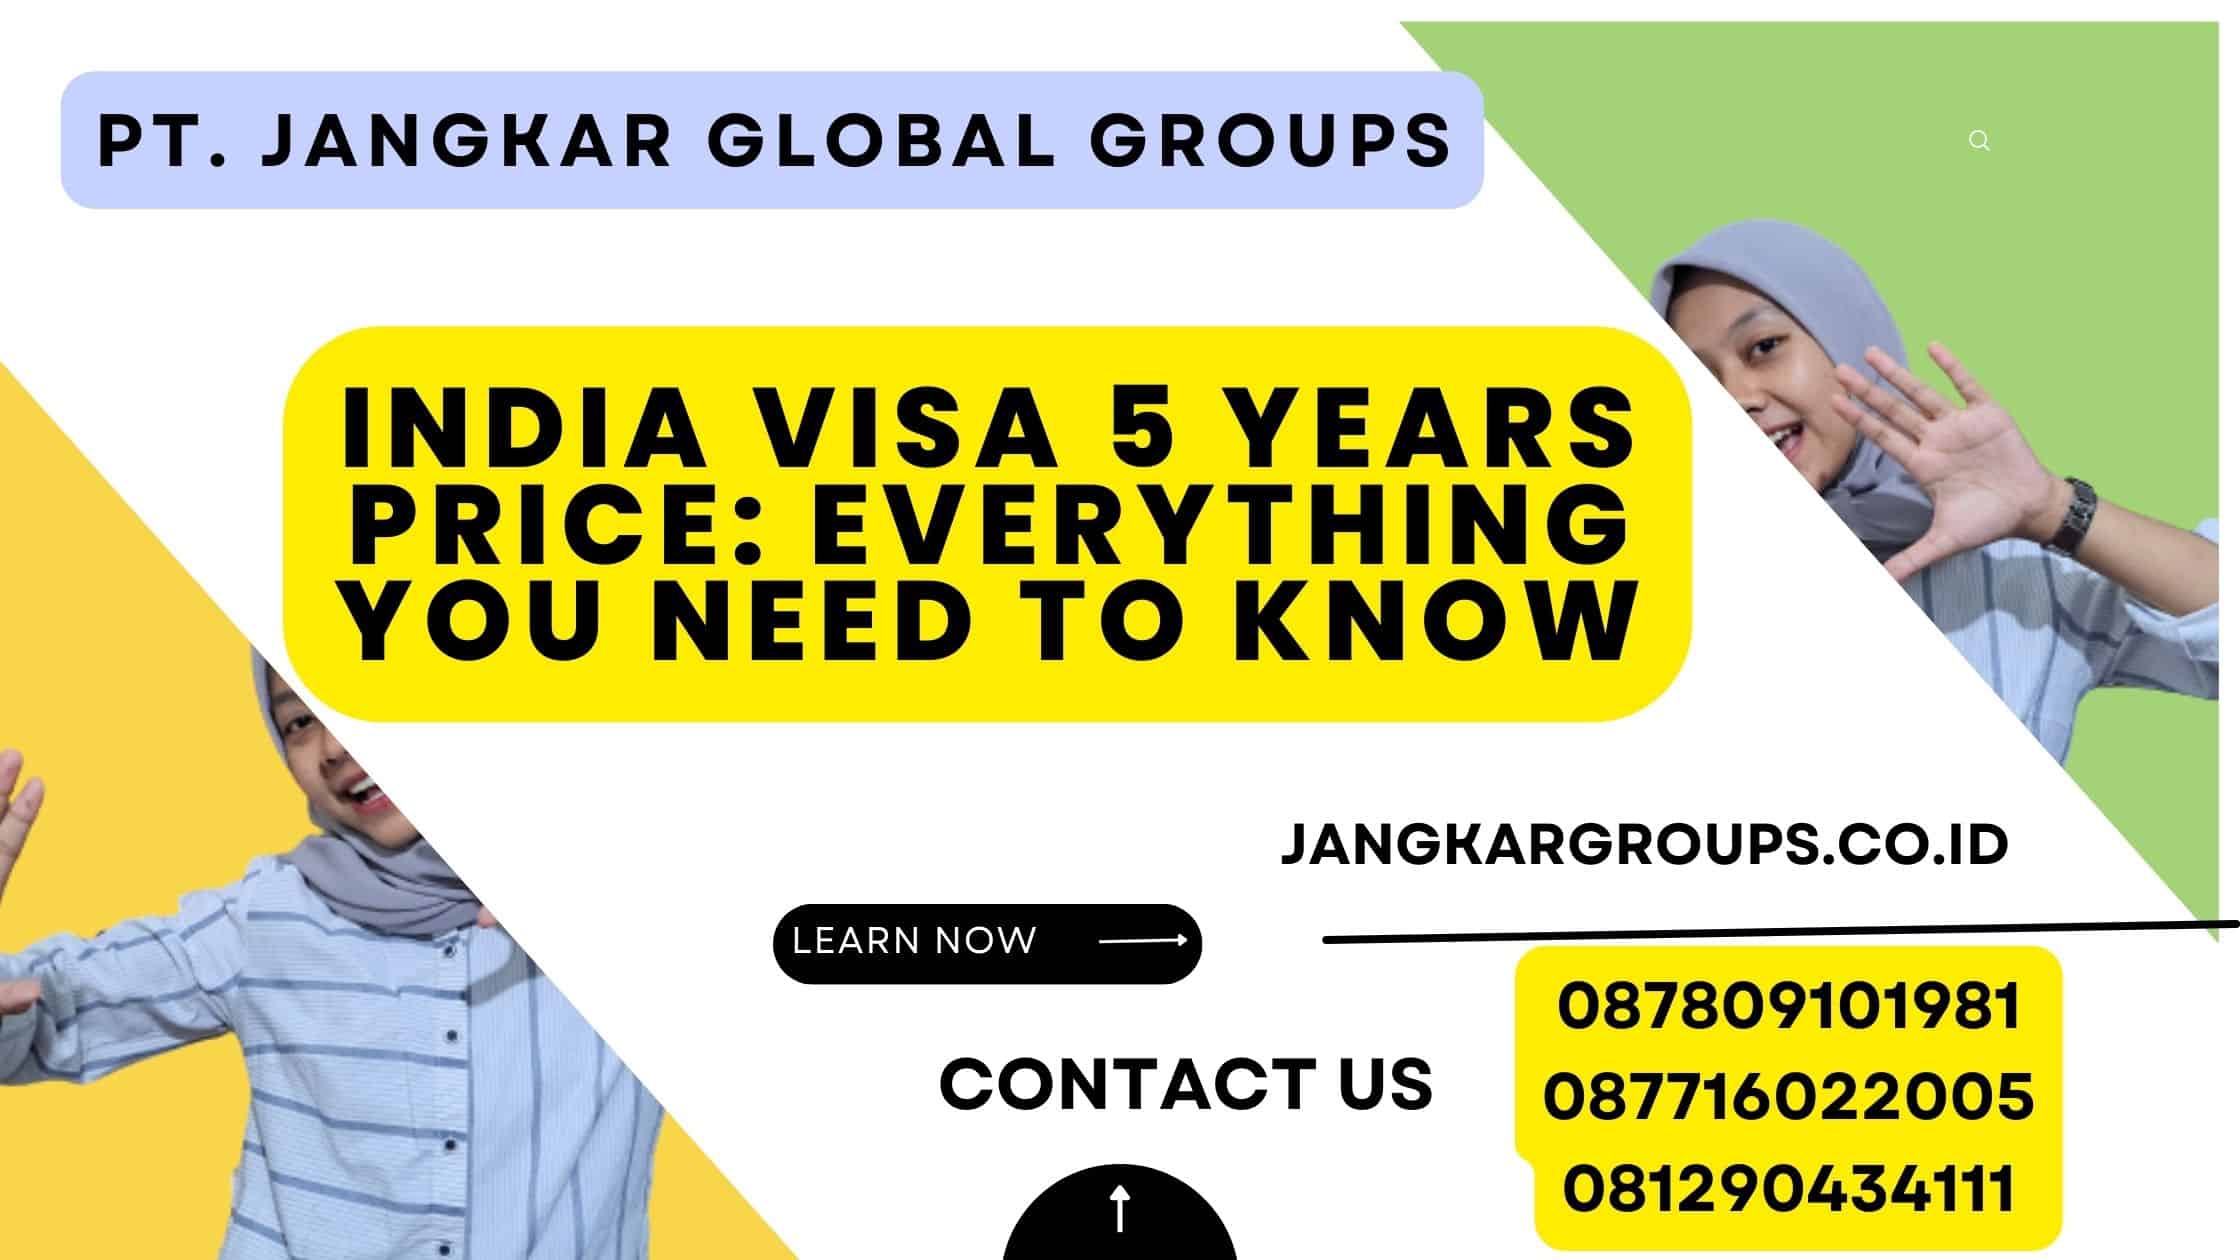 India Visa 5 Years Price: Everything You Need to Know